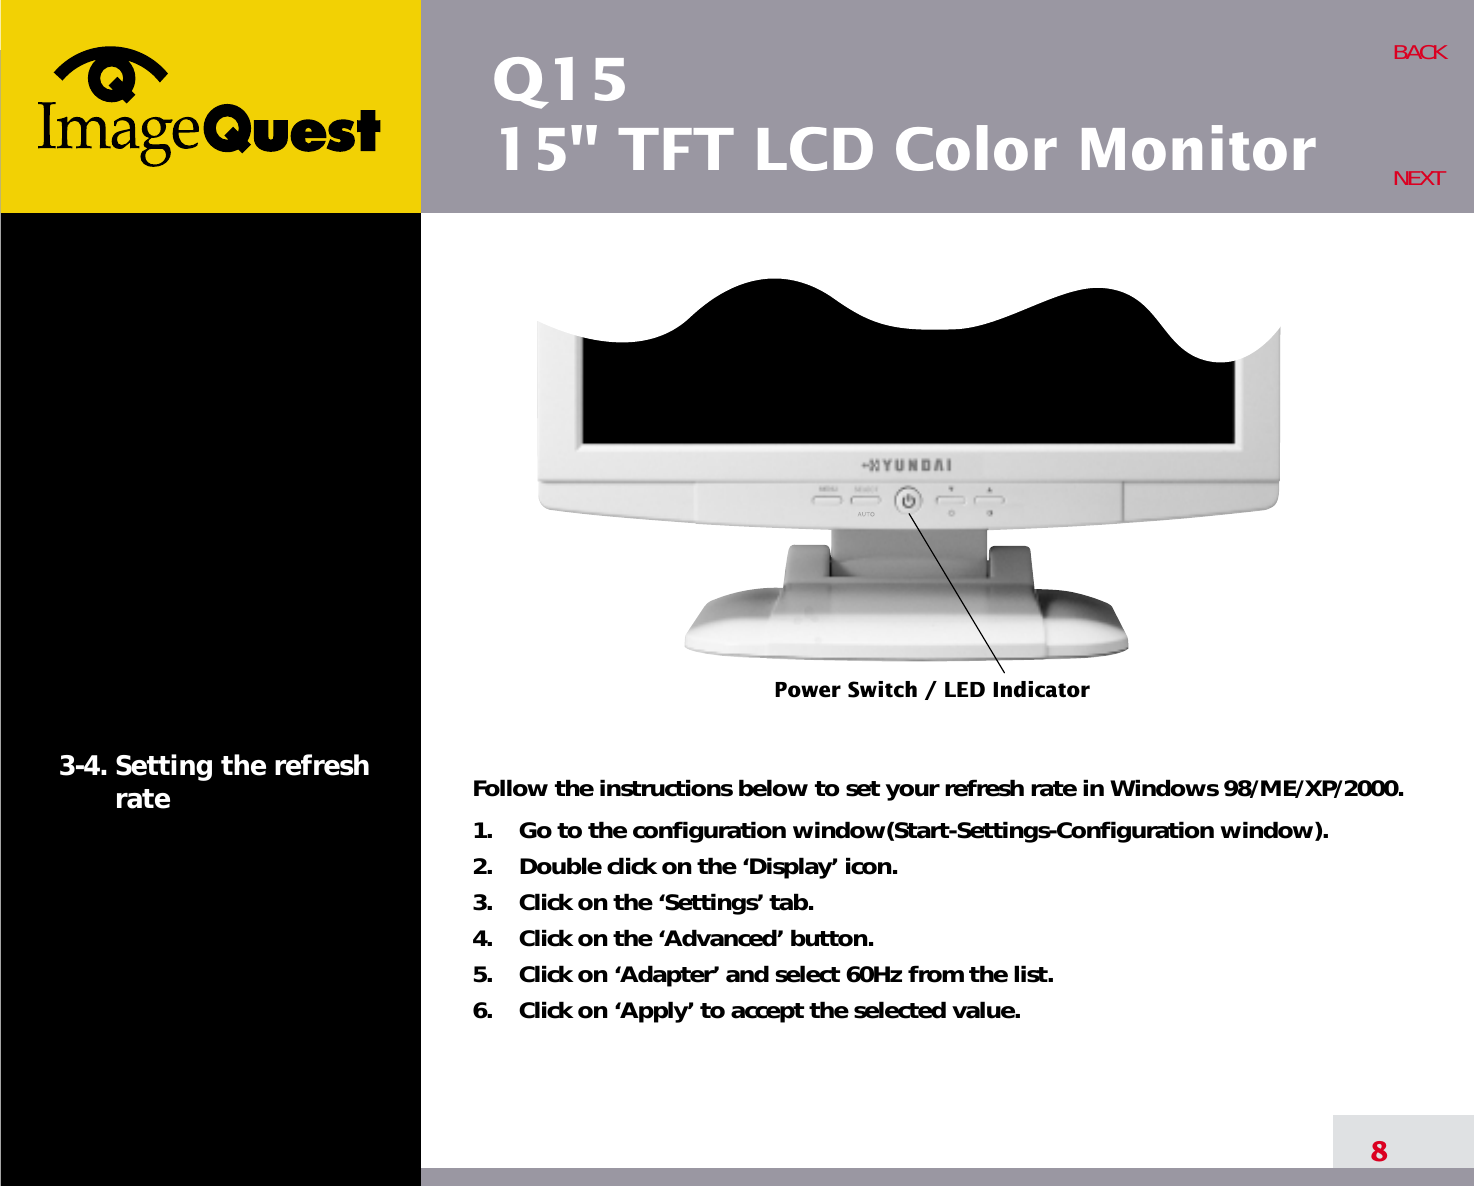 Q1515&quot; TFT LCD Color Monitor8BACKNEXT3-4. Setting the refreshrate Follow the instructions below to set your refresh rate in Windows 98/ME/XP/2000.1.    Go to the configuration window(Start-Settings-Configuration window).2.    Double click on the ‘Display’ icon.3.    Click on the ‘Settings’ tab.4.    Click on the ‘Advanced’ button.5.    Click on ‘Adapter’ and select 60Hz from the list.6.    Click on ‘Apply’ to accept the selected value.Power Switch / LED Indicator